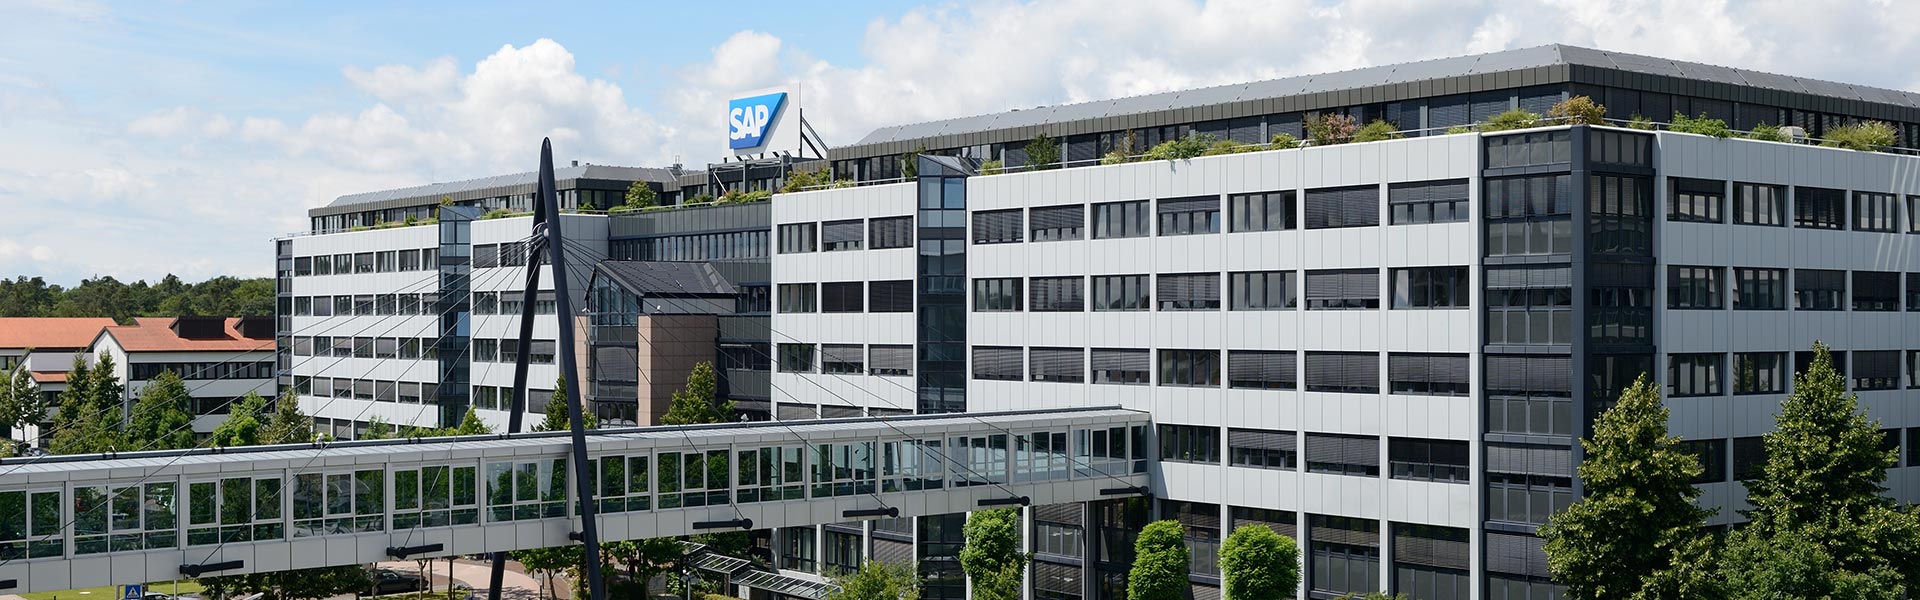 SAP to Announce Results for Third Quarter of 2020